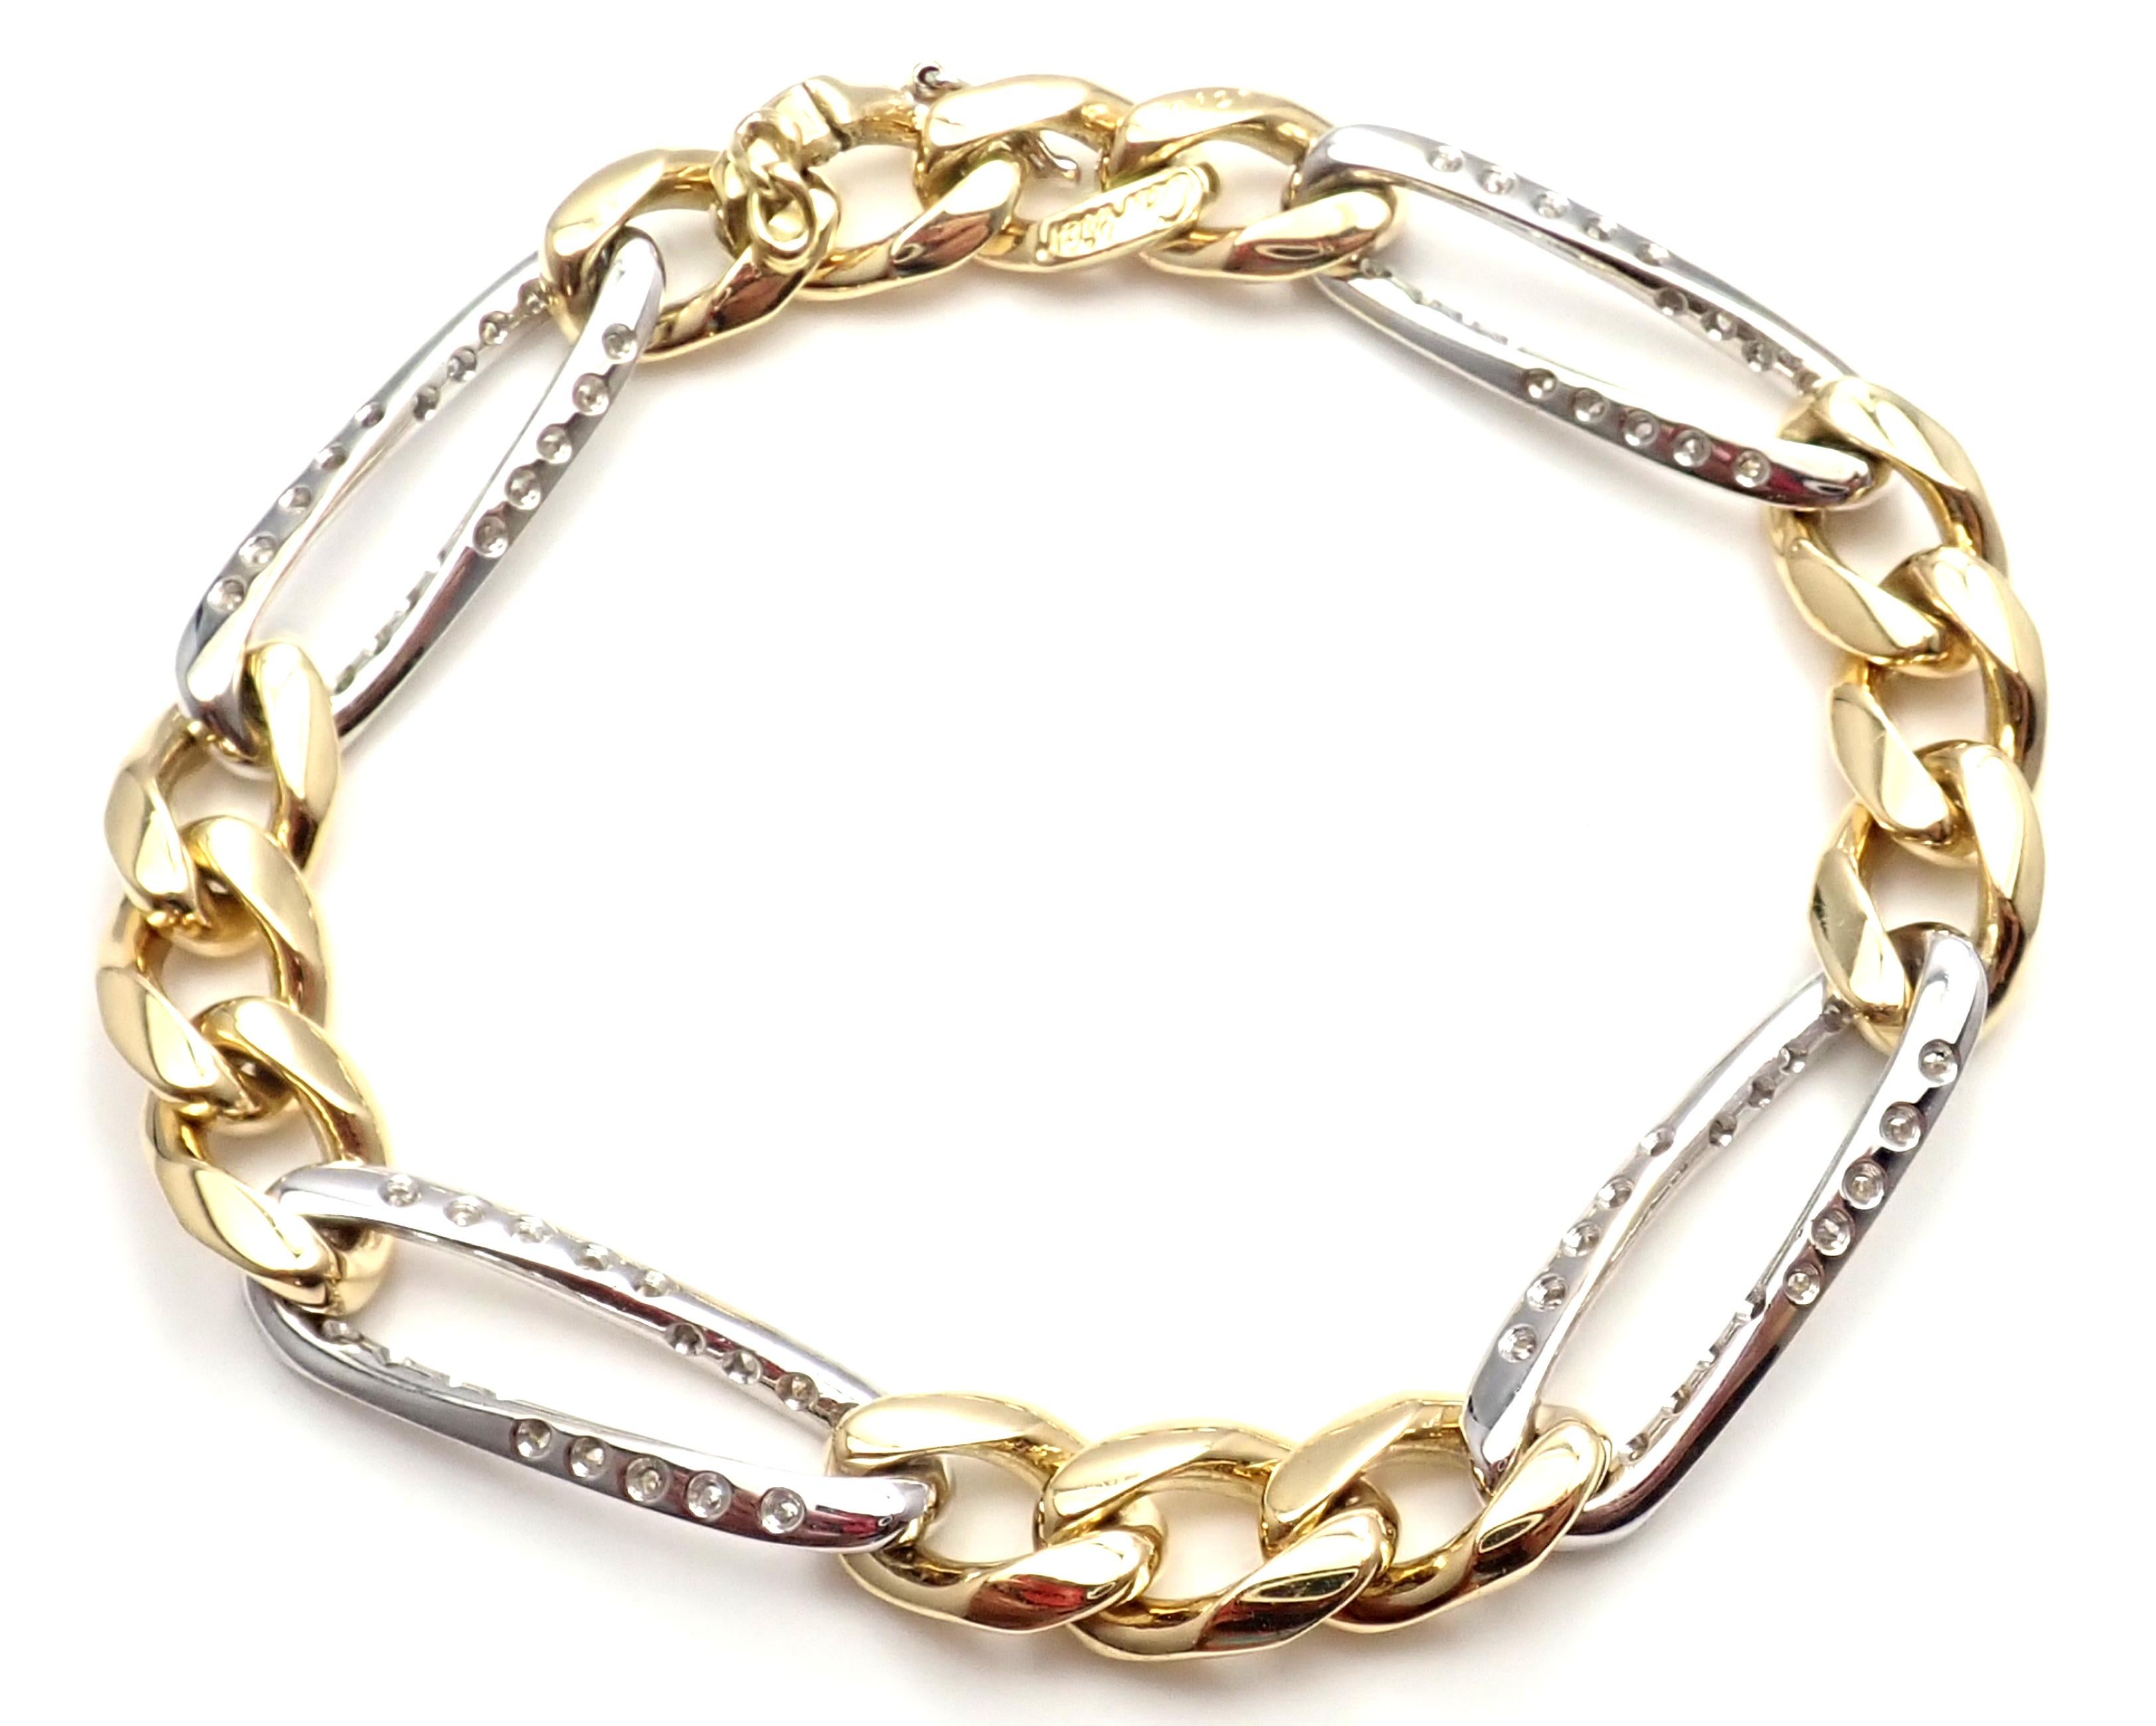 18k Yellow And White Gold Diamond Link Bracelet by Cartier. 
With 80 round brilliant cut diamonds VS1 clarity, E color total weigh approx. 1.60ct
Details: 
Length: 7 1/2